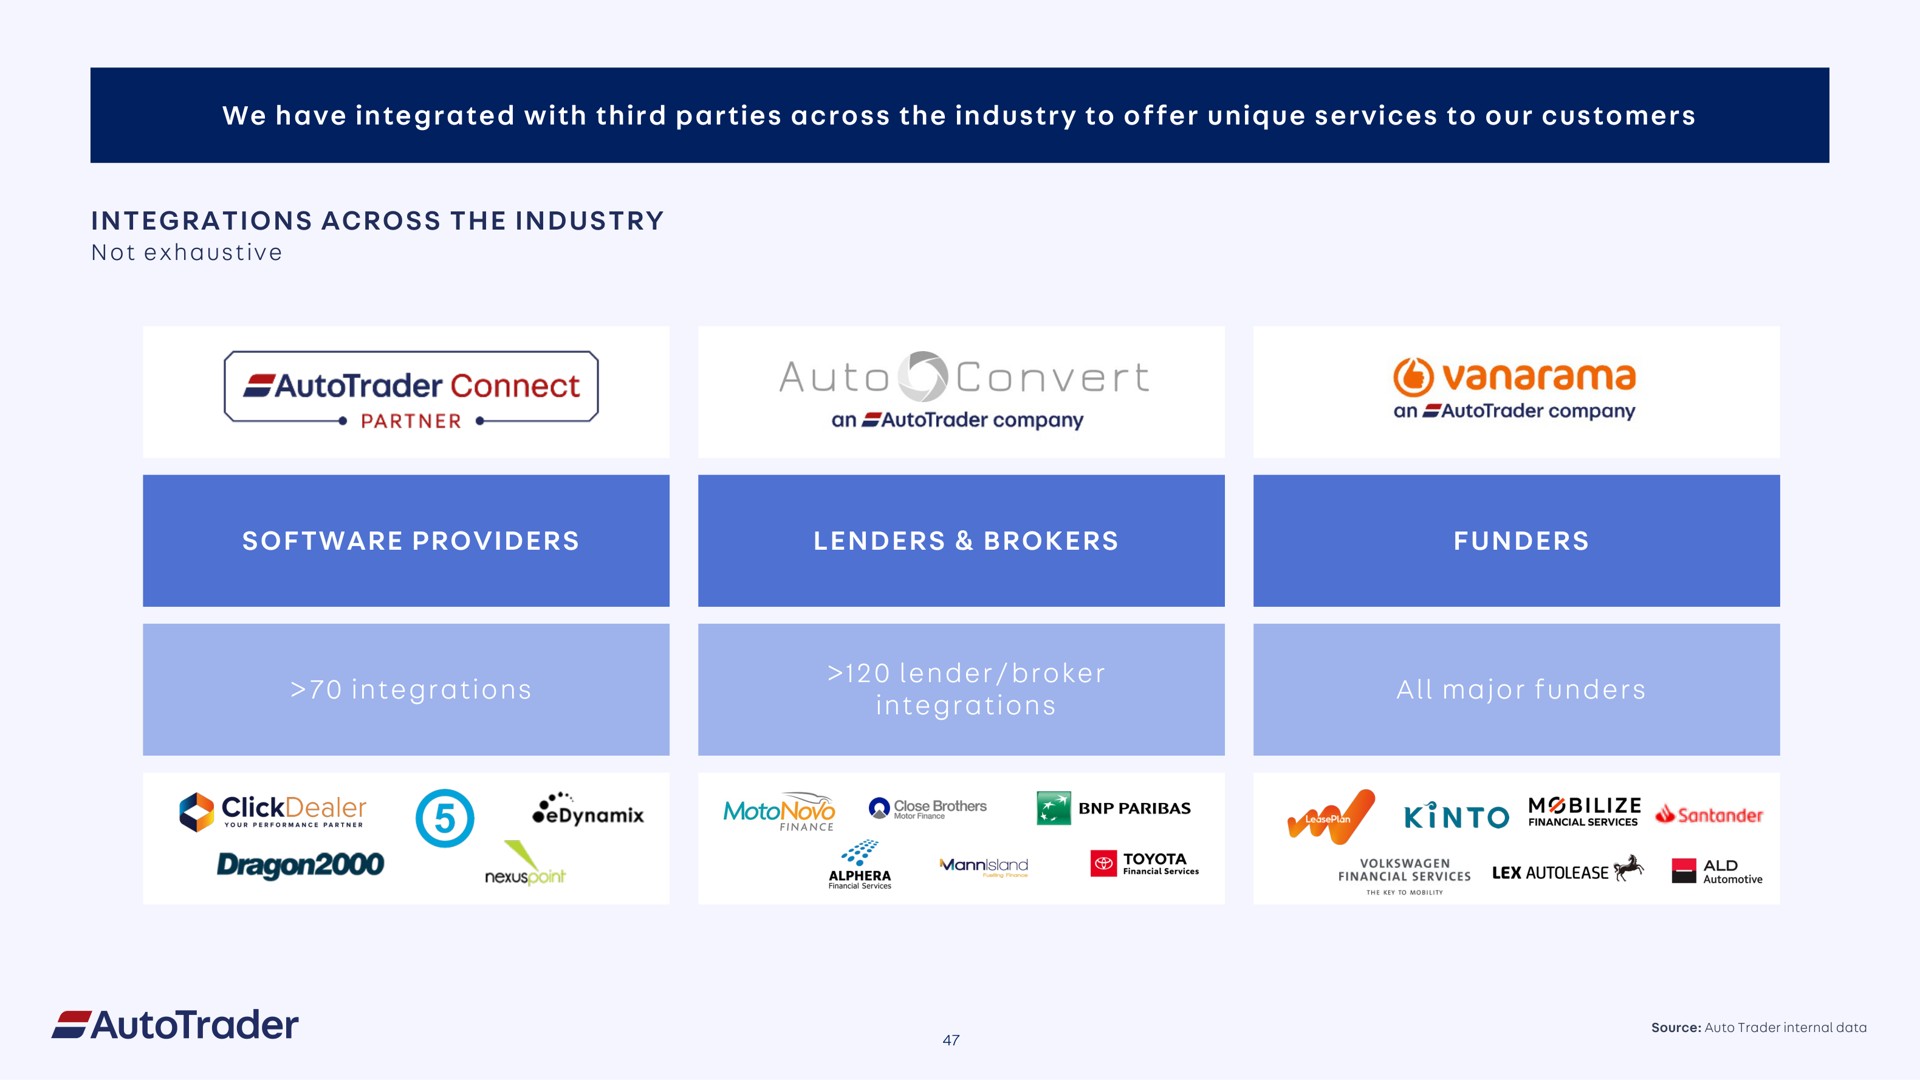 we have integrated with third parties across the industry to offer unique services to our customers integrations across the industry auto convert auto trader connect providers lenders brokers integrations lender broker integrations all major partner an company an company dragon nexus series financial | Auto Trader Group